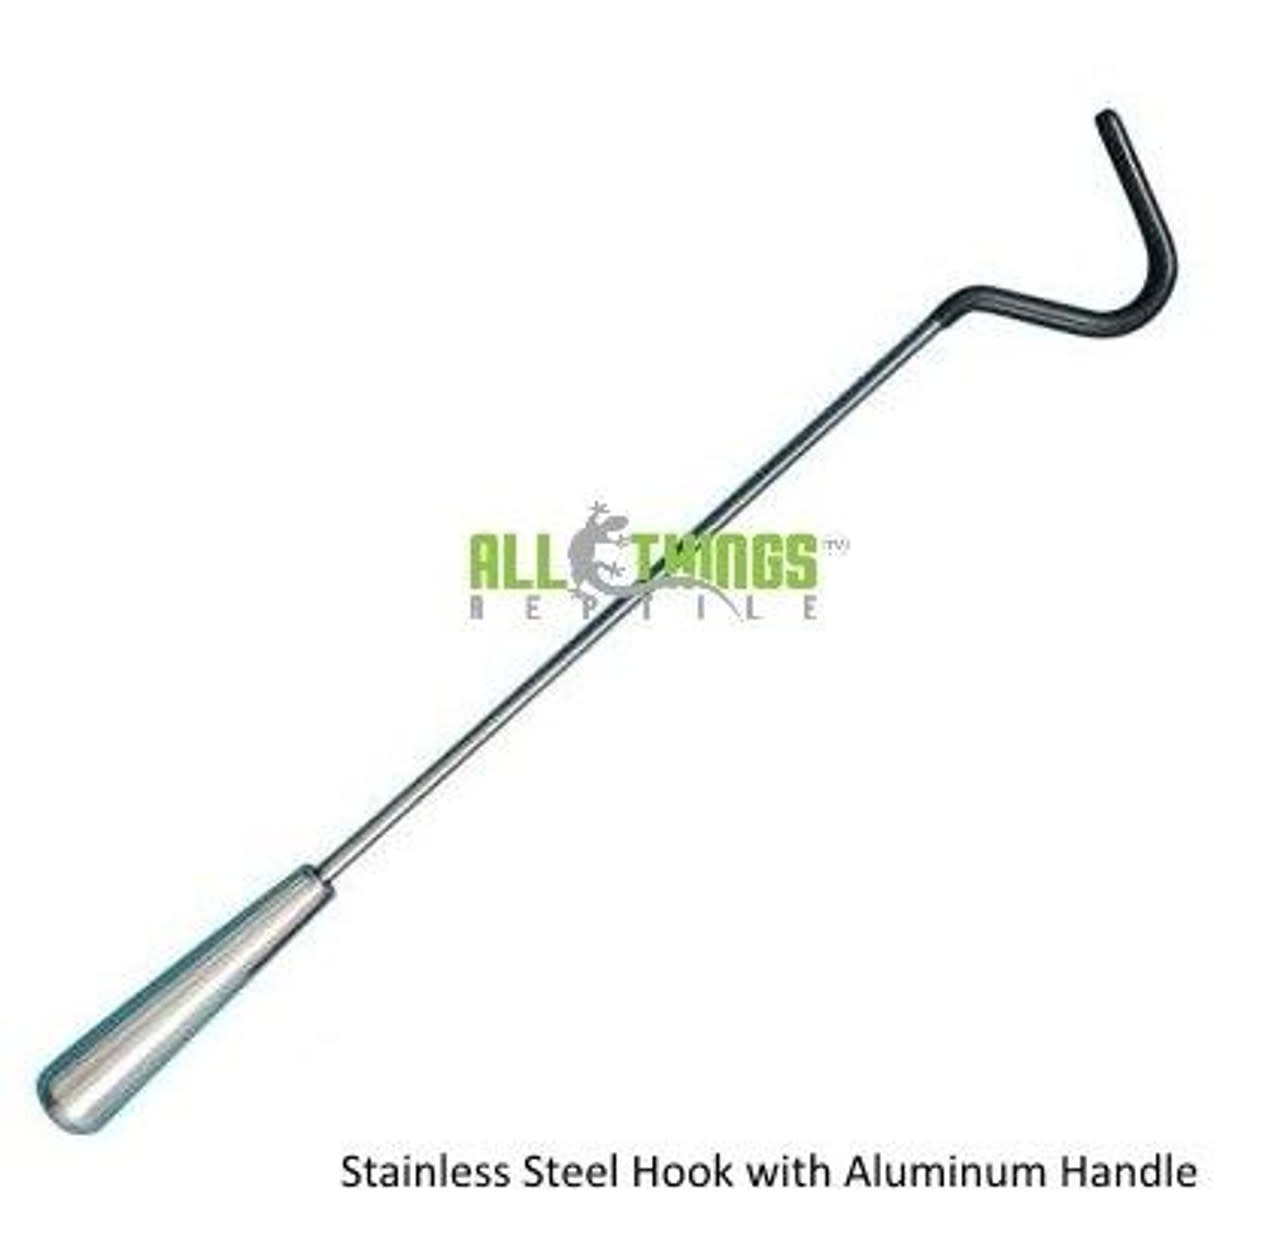 All Things Reptile ATR Stainless Steel Hook 38 with Aluminum Handle